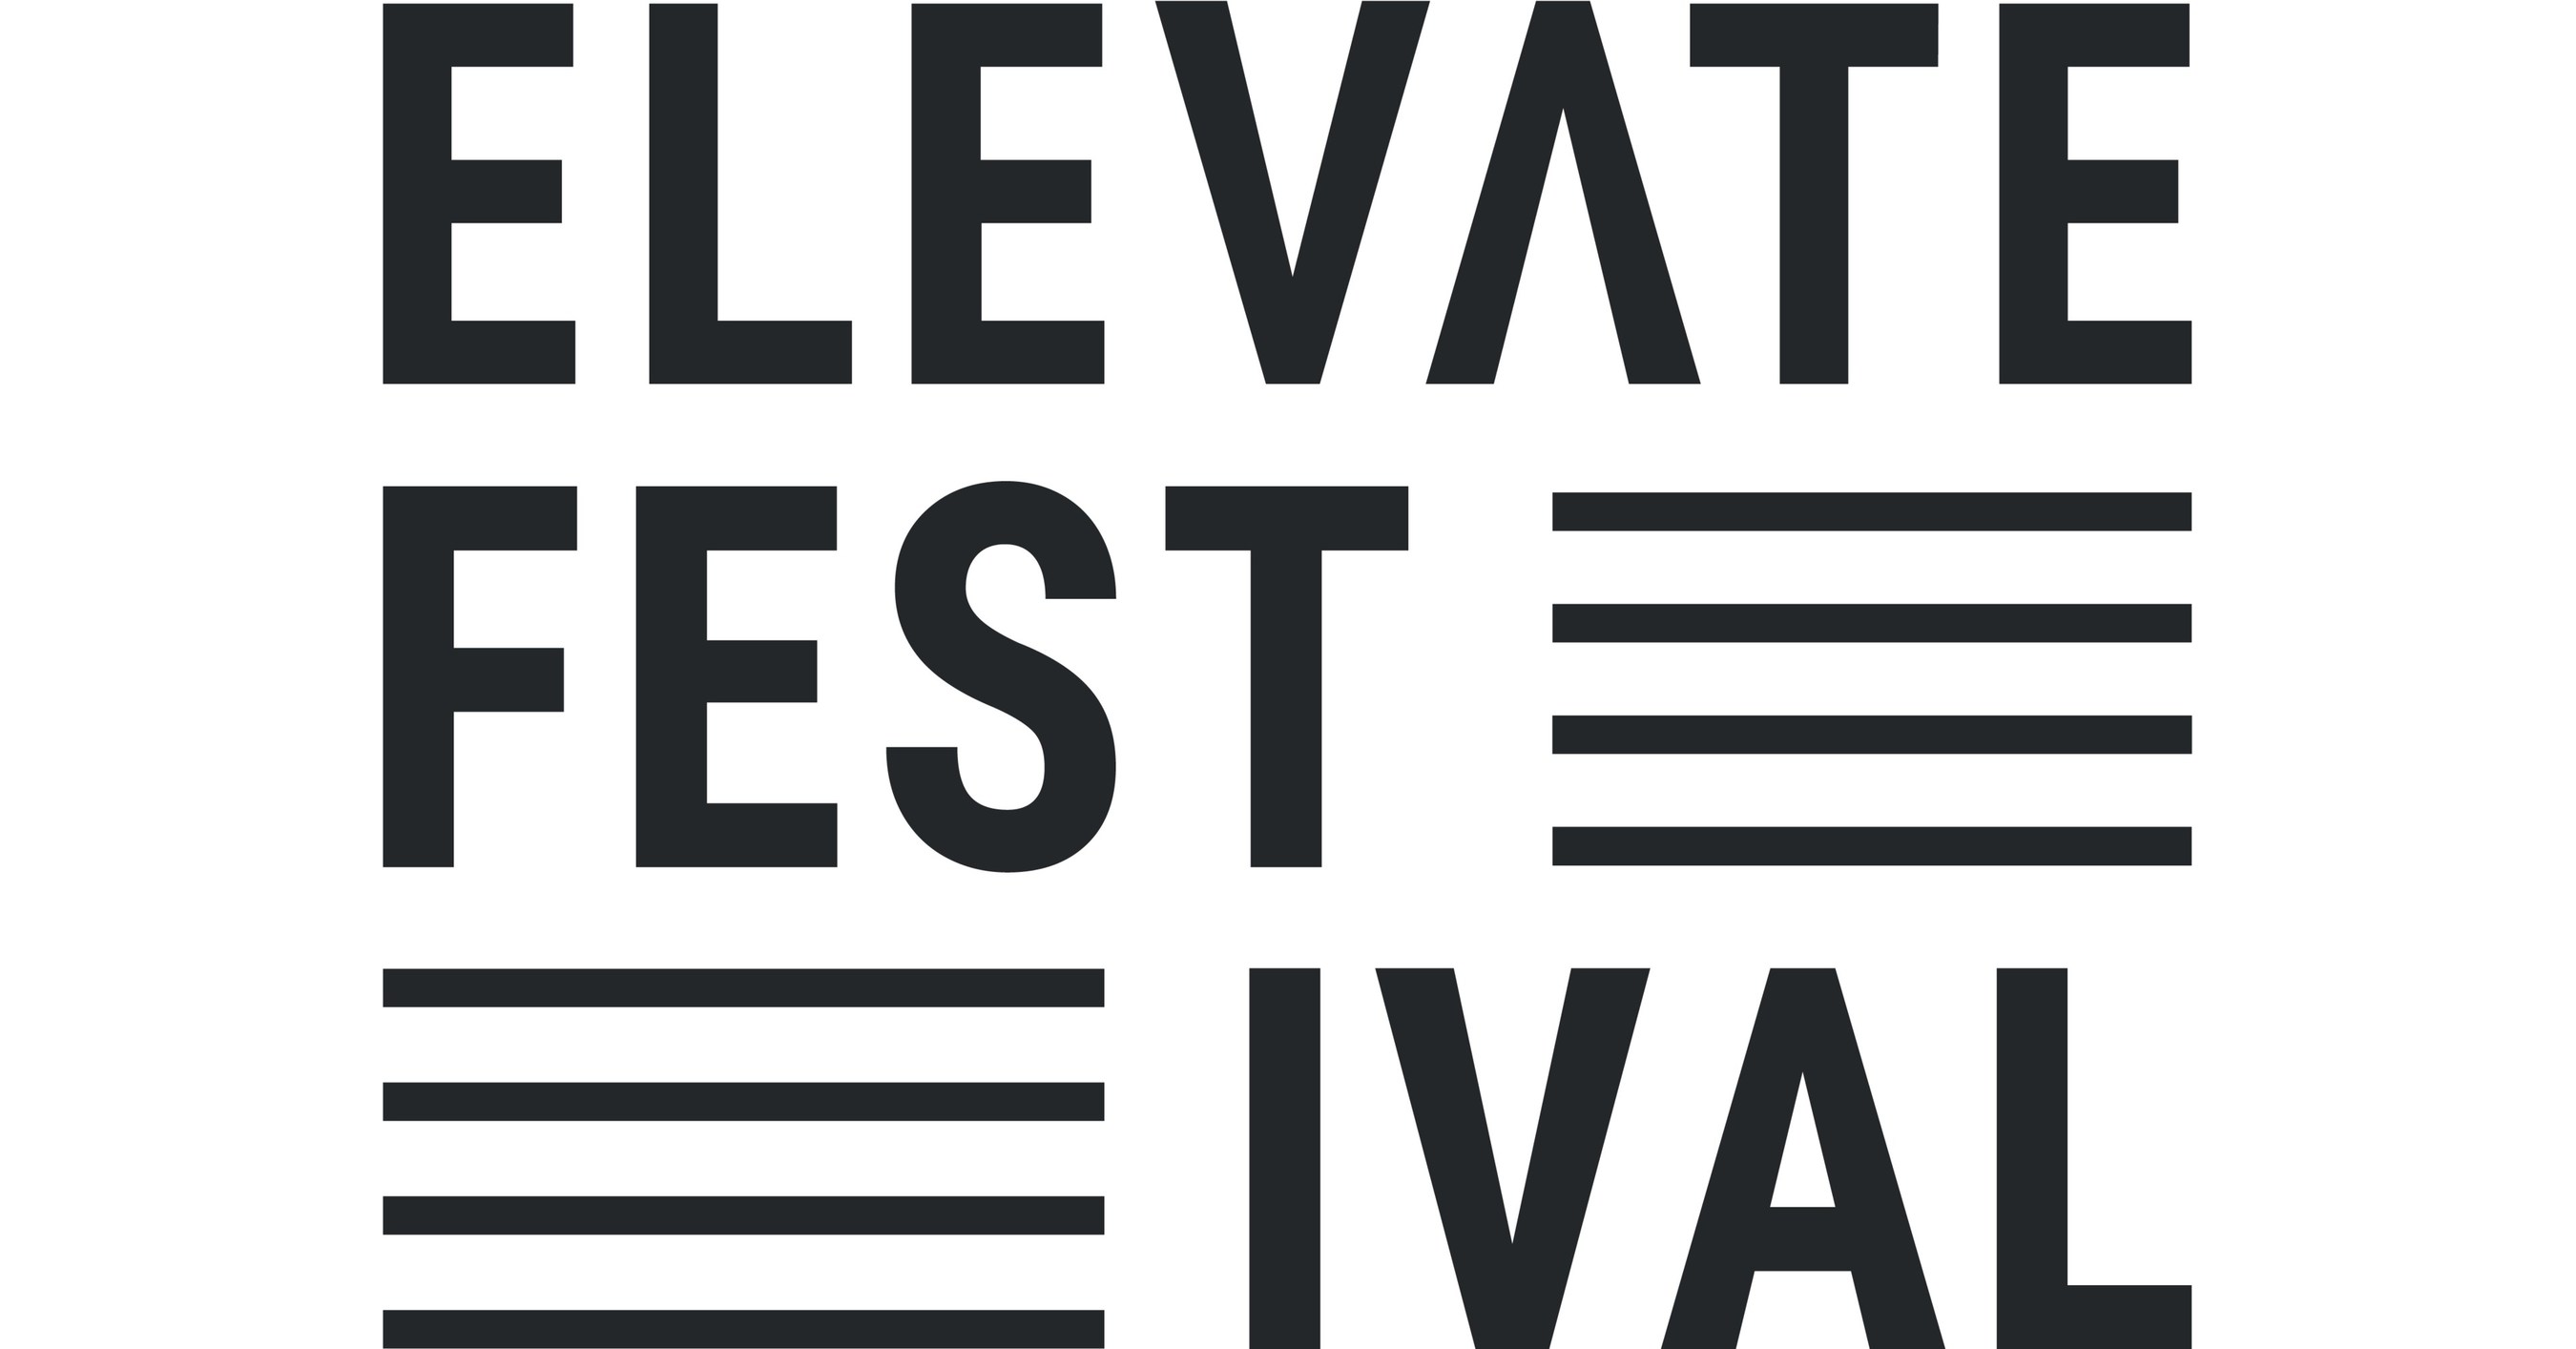 Elevate Festival schedule and Block Party details announced, alongside